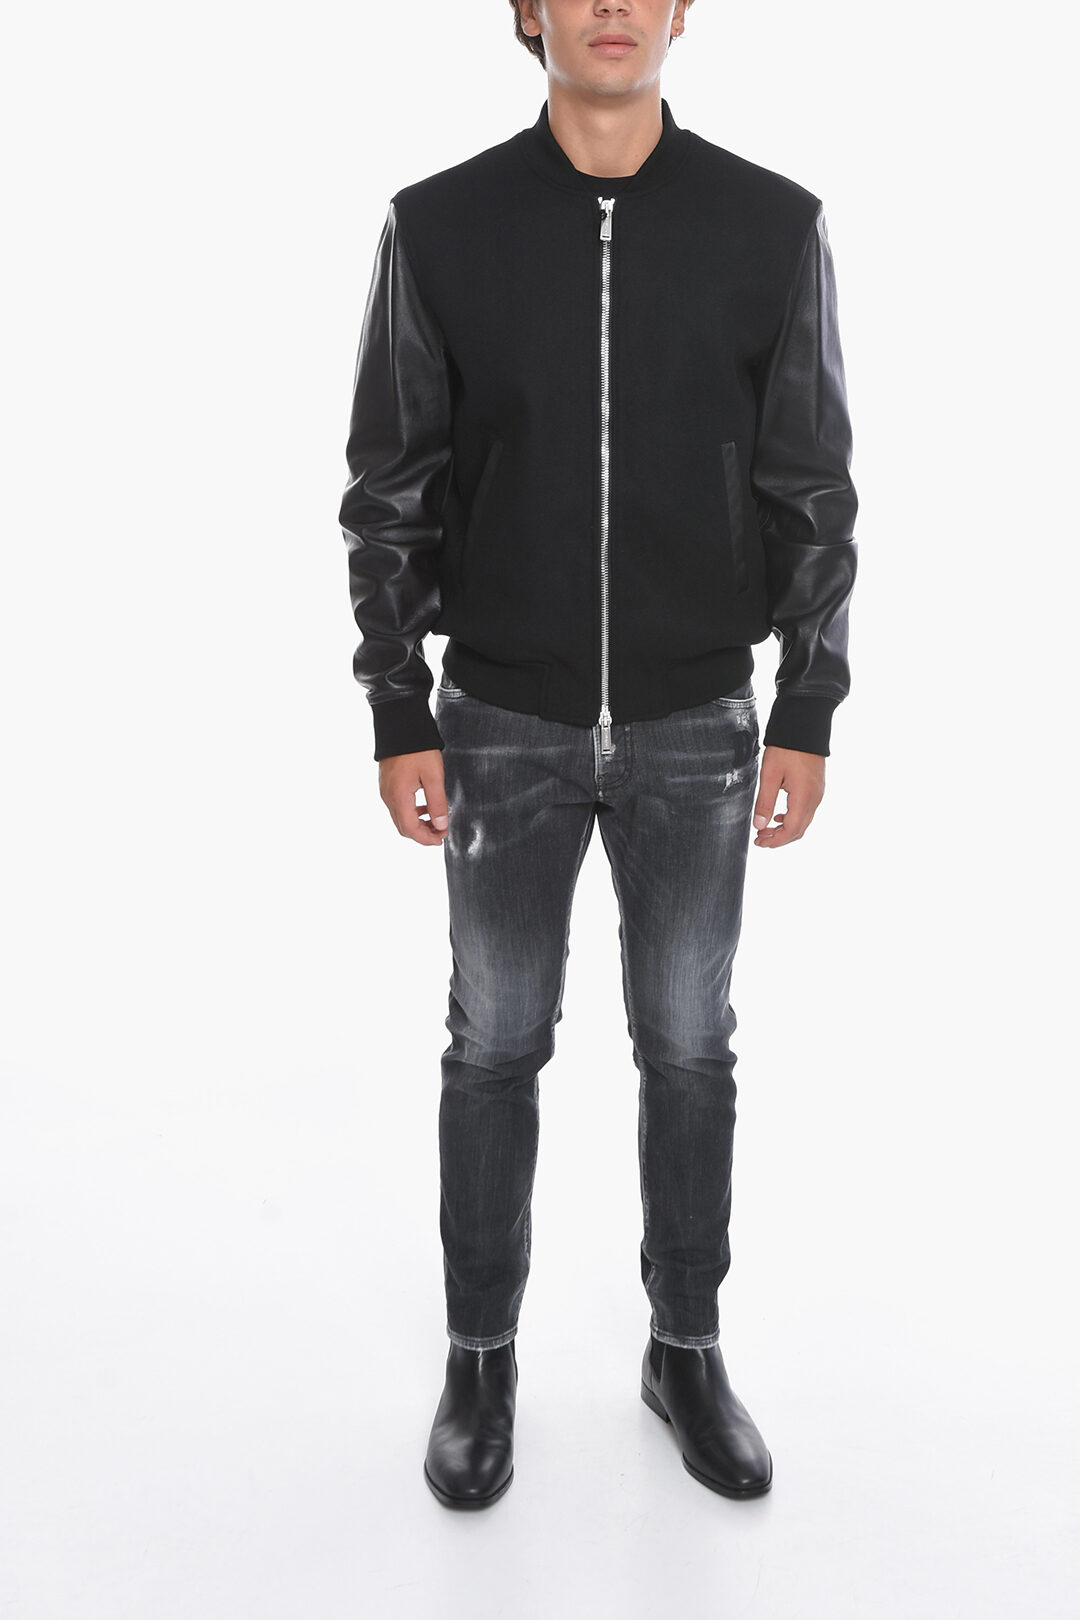 Dsquared2 Wool Blend Bomber With Eco-Leather Sleeves men - Glamood Outlet